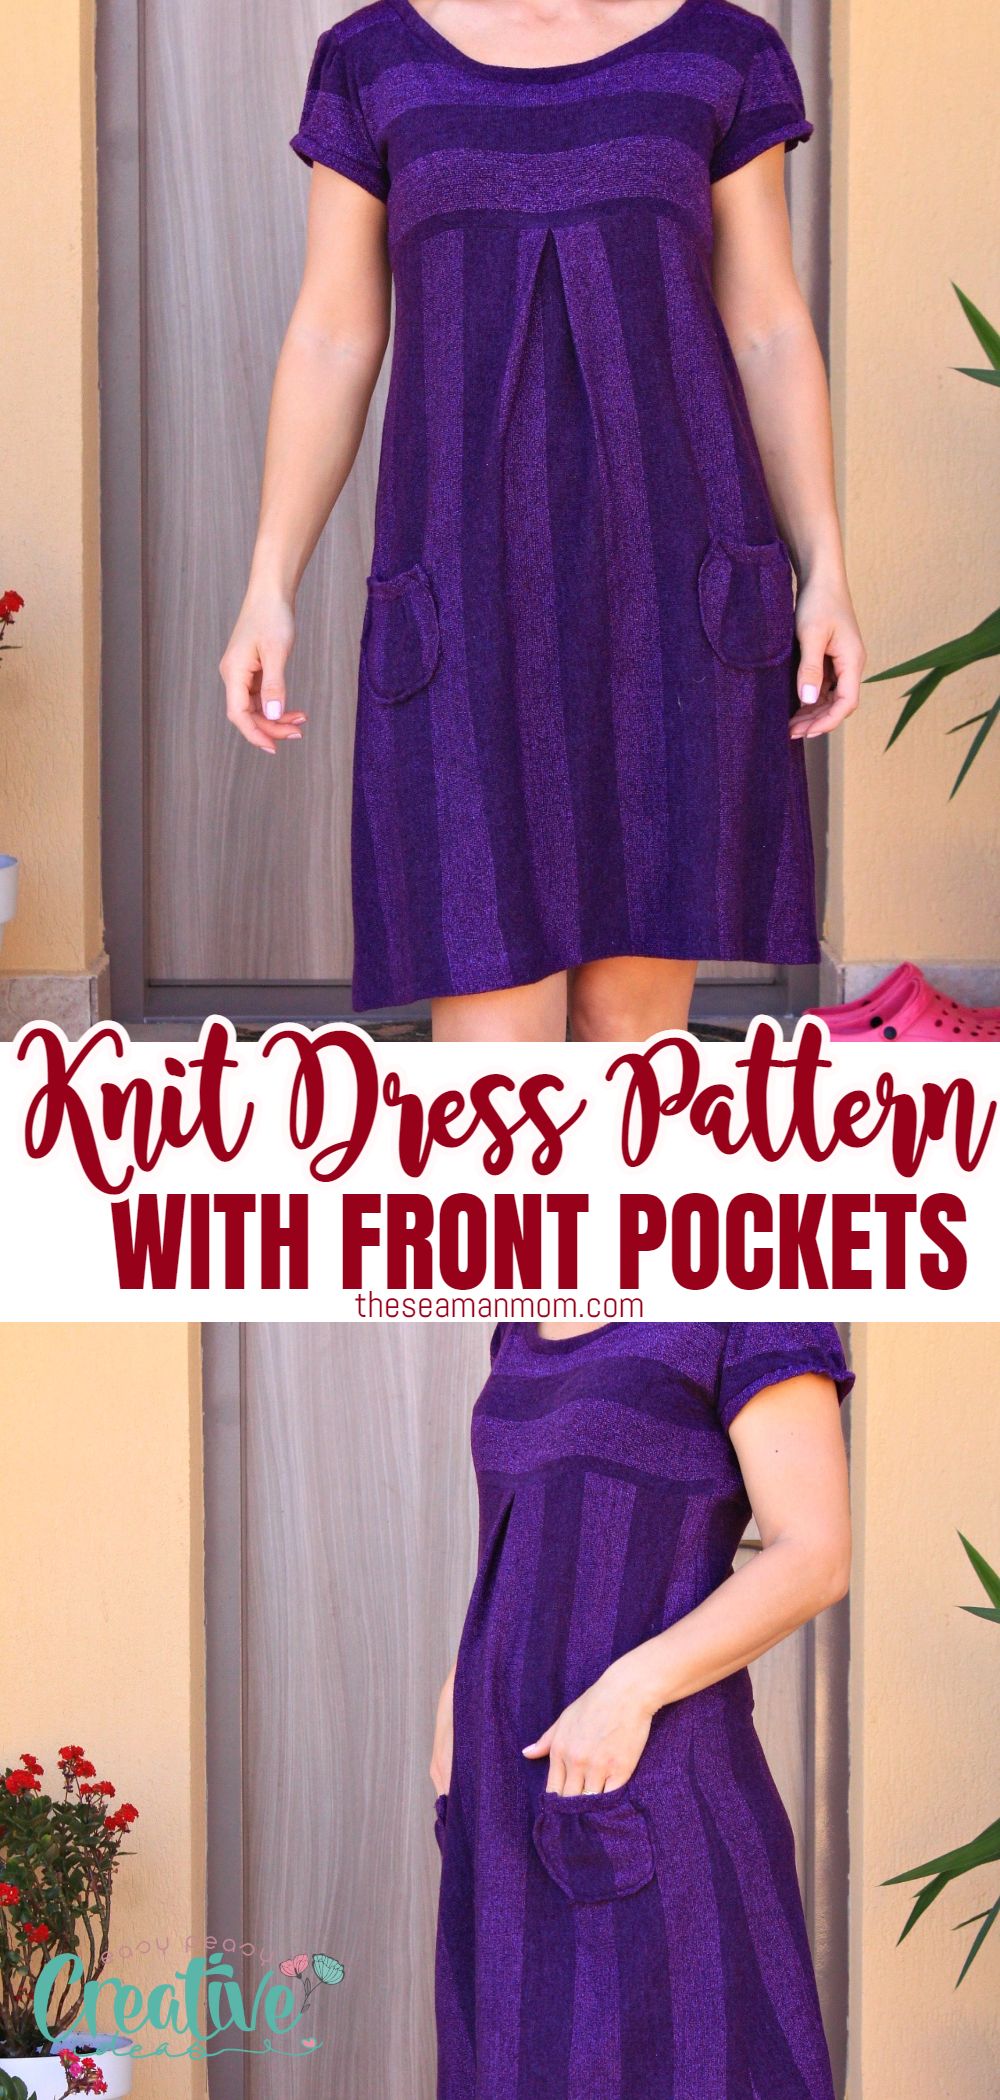 Make yourself an easy dress with pockets that is comfortable to wear, easy to customize and so versatile! Not to mention cute as a button! ! This knit dress pattern is so simple and easy to sew! via @petroneagu